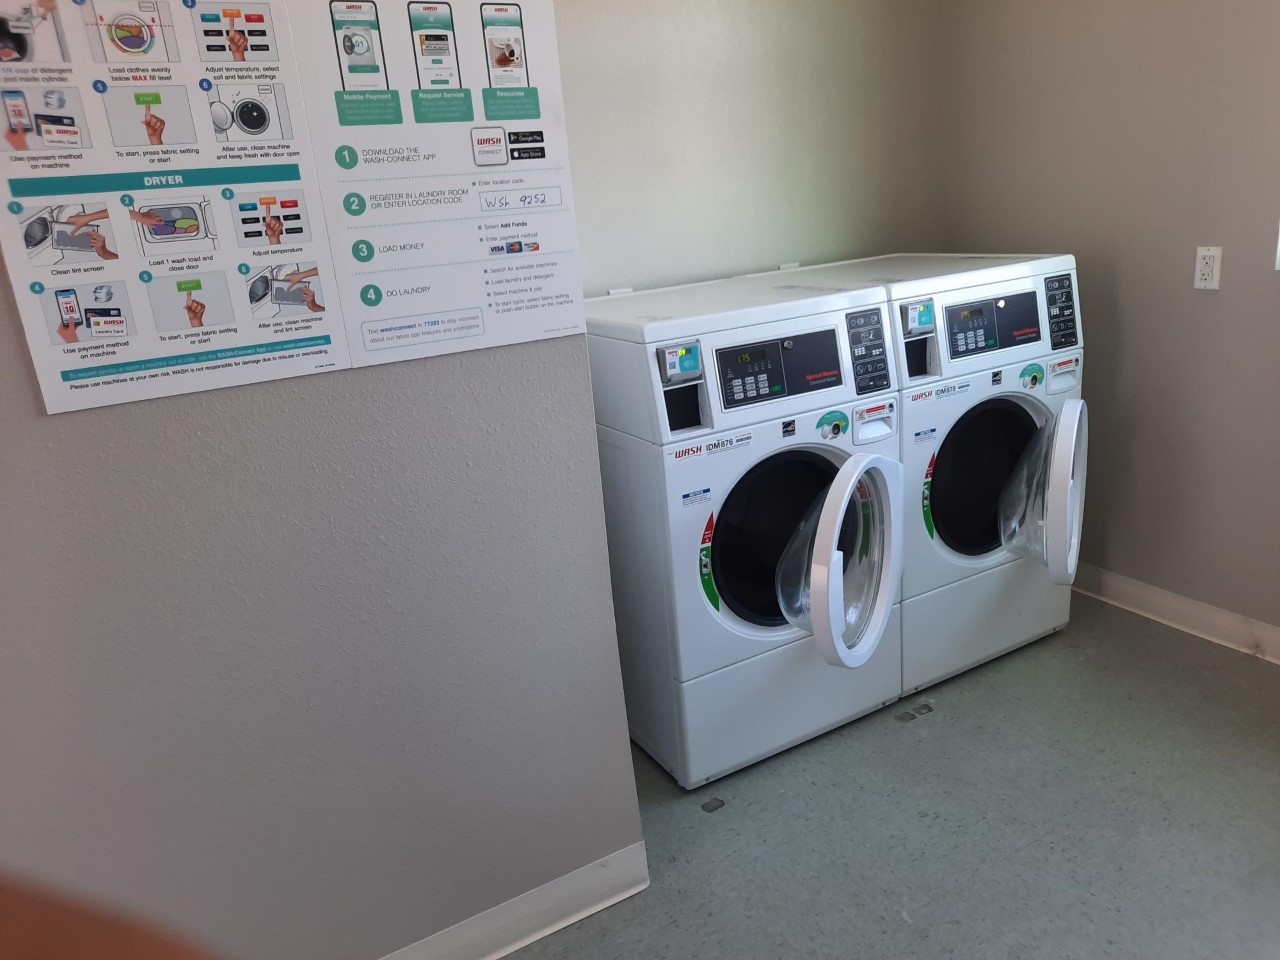 Laundry Room with front loading washer and dryer and tiled flooring. There is a poster on the wall describing how to use the washer and dryer.